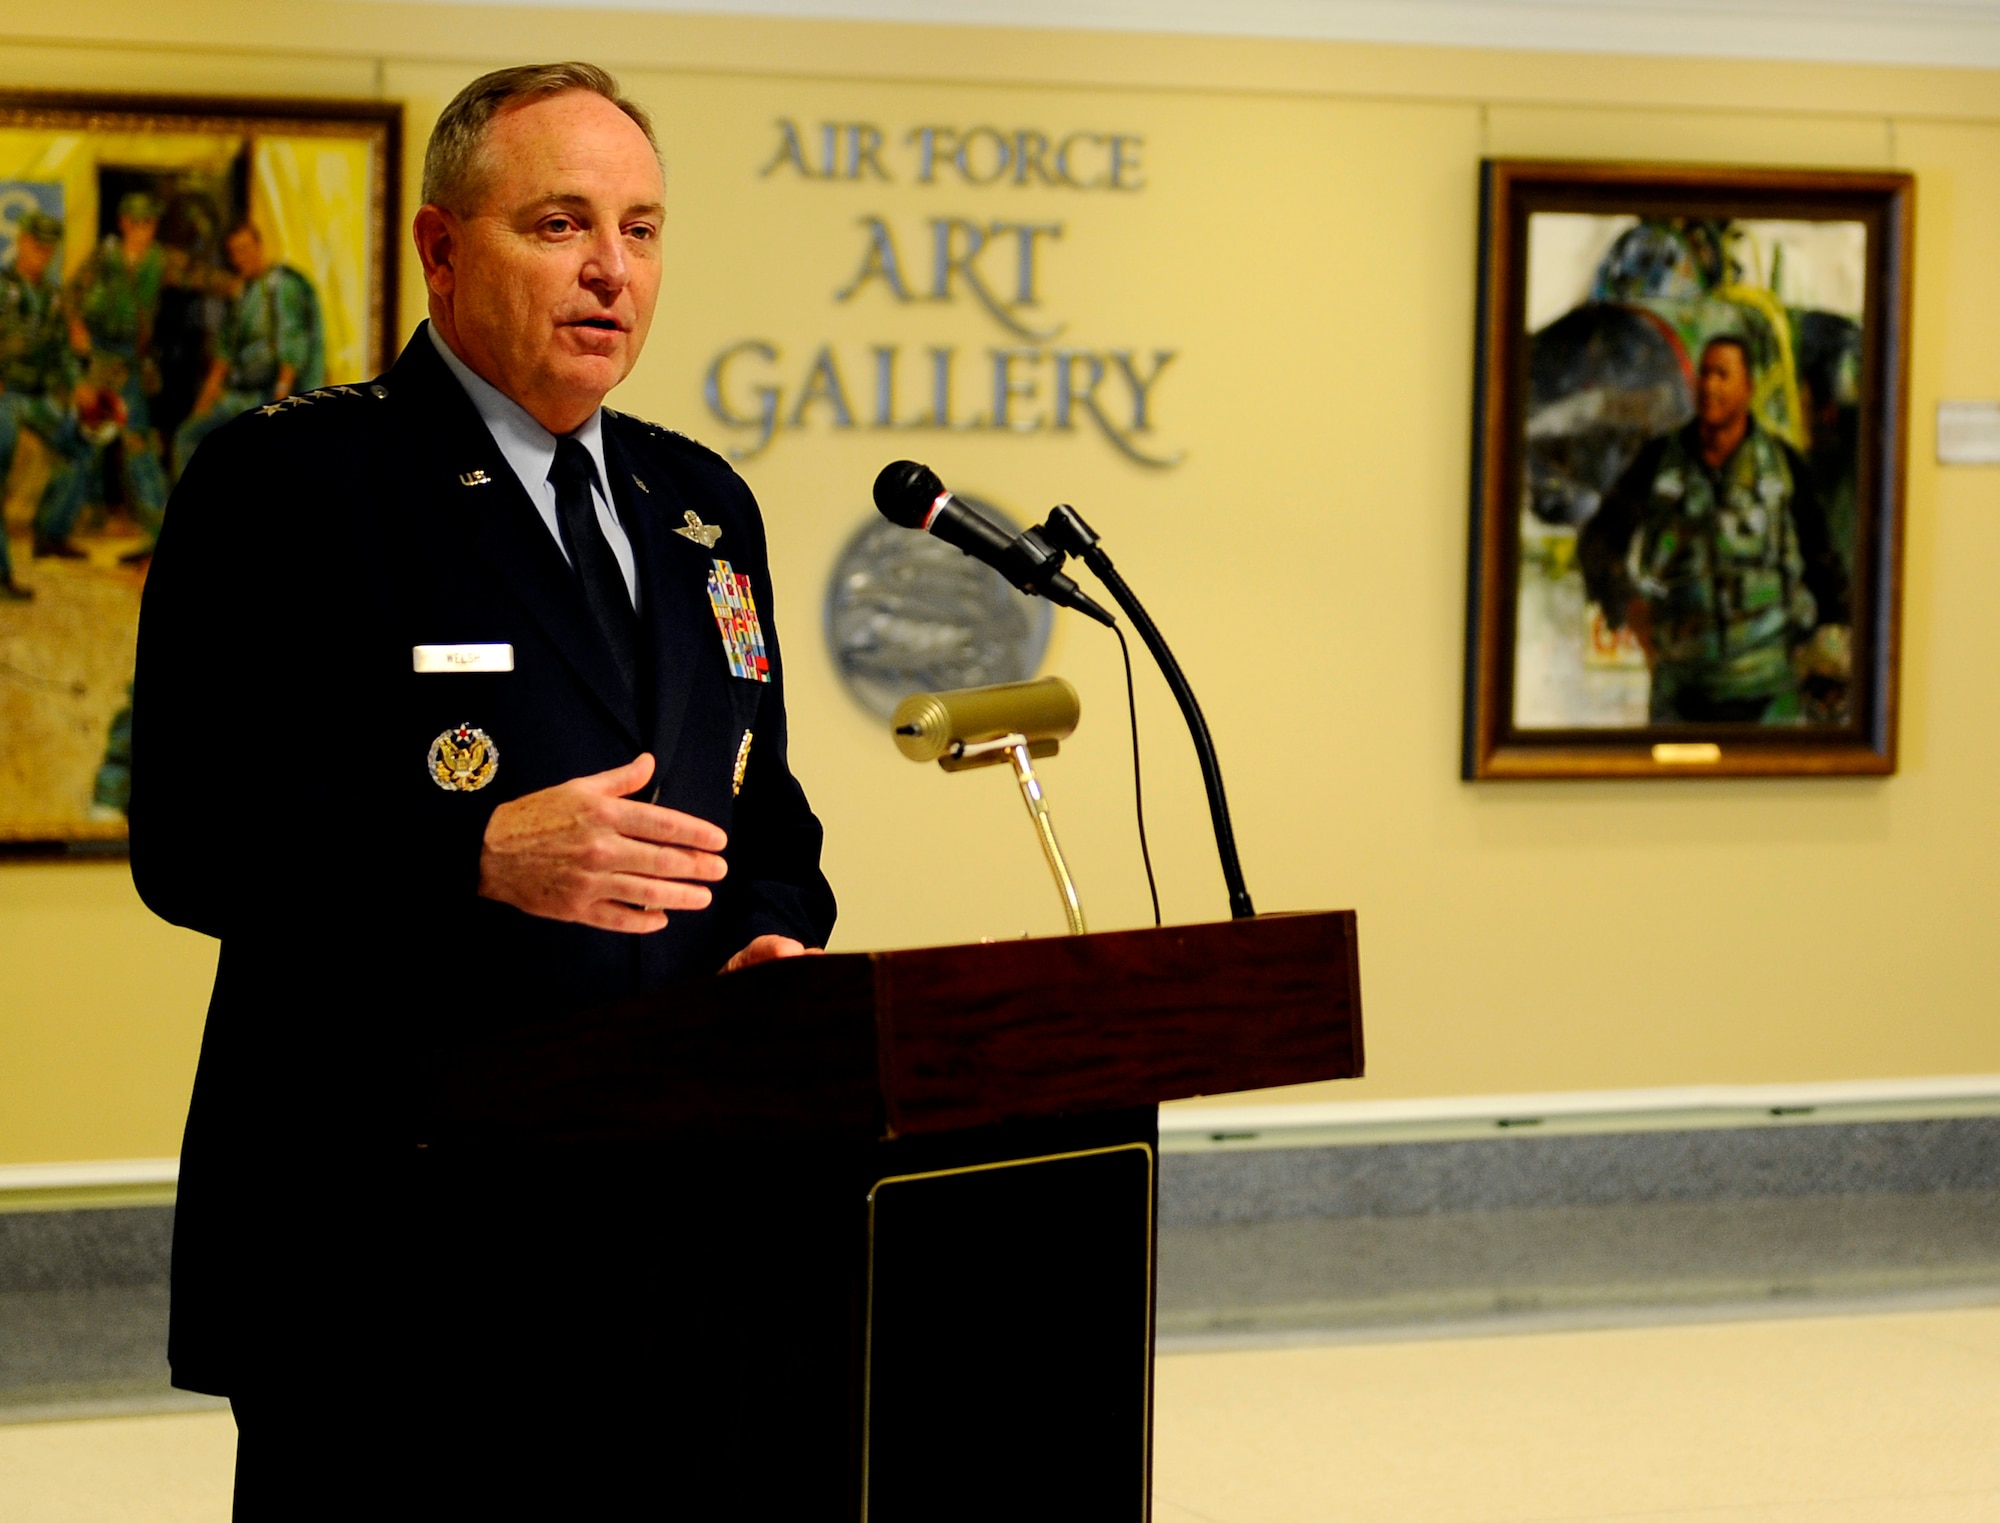 Air Force Chief of Staff Gen. Mark A. Welsh III gives remarks at the opening of the 50th commemoration of the Vietnam War art display in the Air Force Art Gallery located in the Pentagon, Washington, D.C., May 26, 2016. (U.S. Air Force photo/Staff Sgt. Carlin Leslie) 